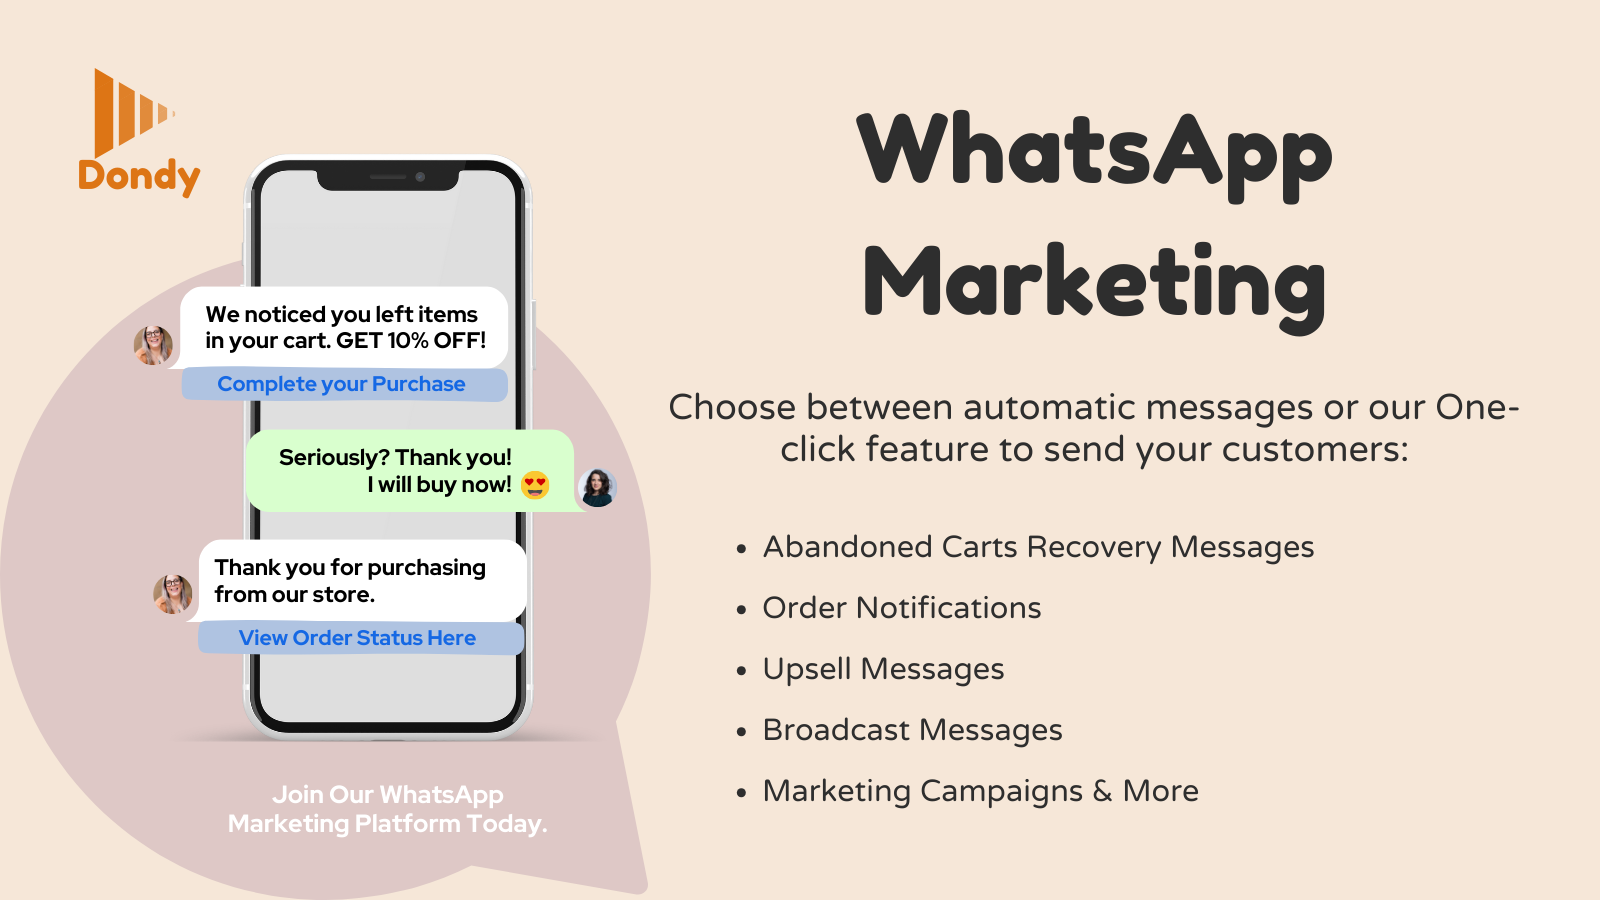 Simple & Easy to install the whatsapp app